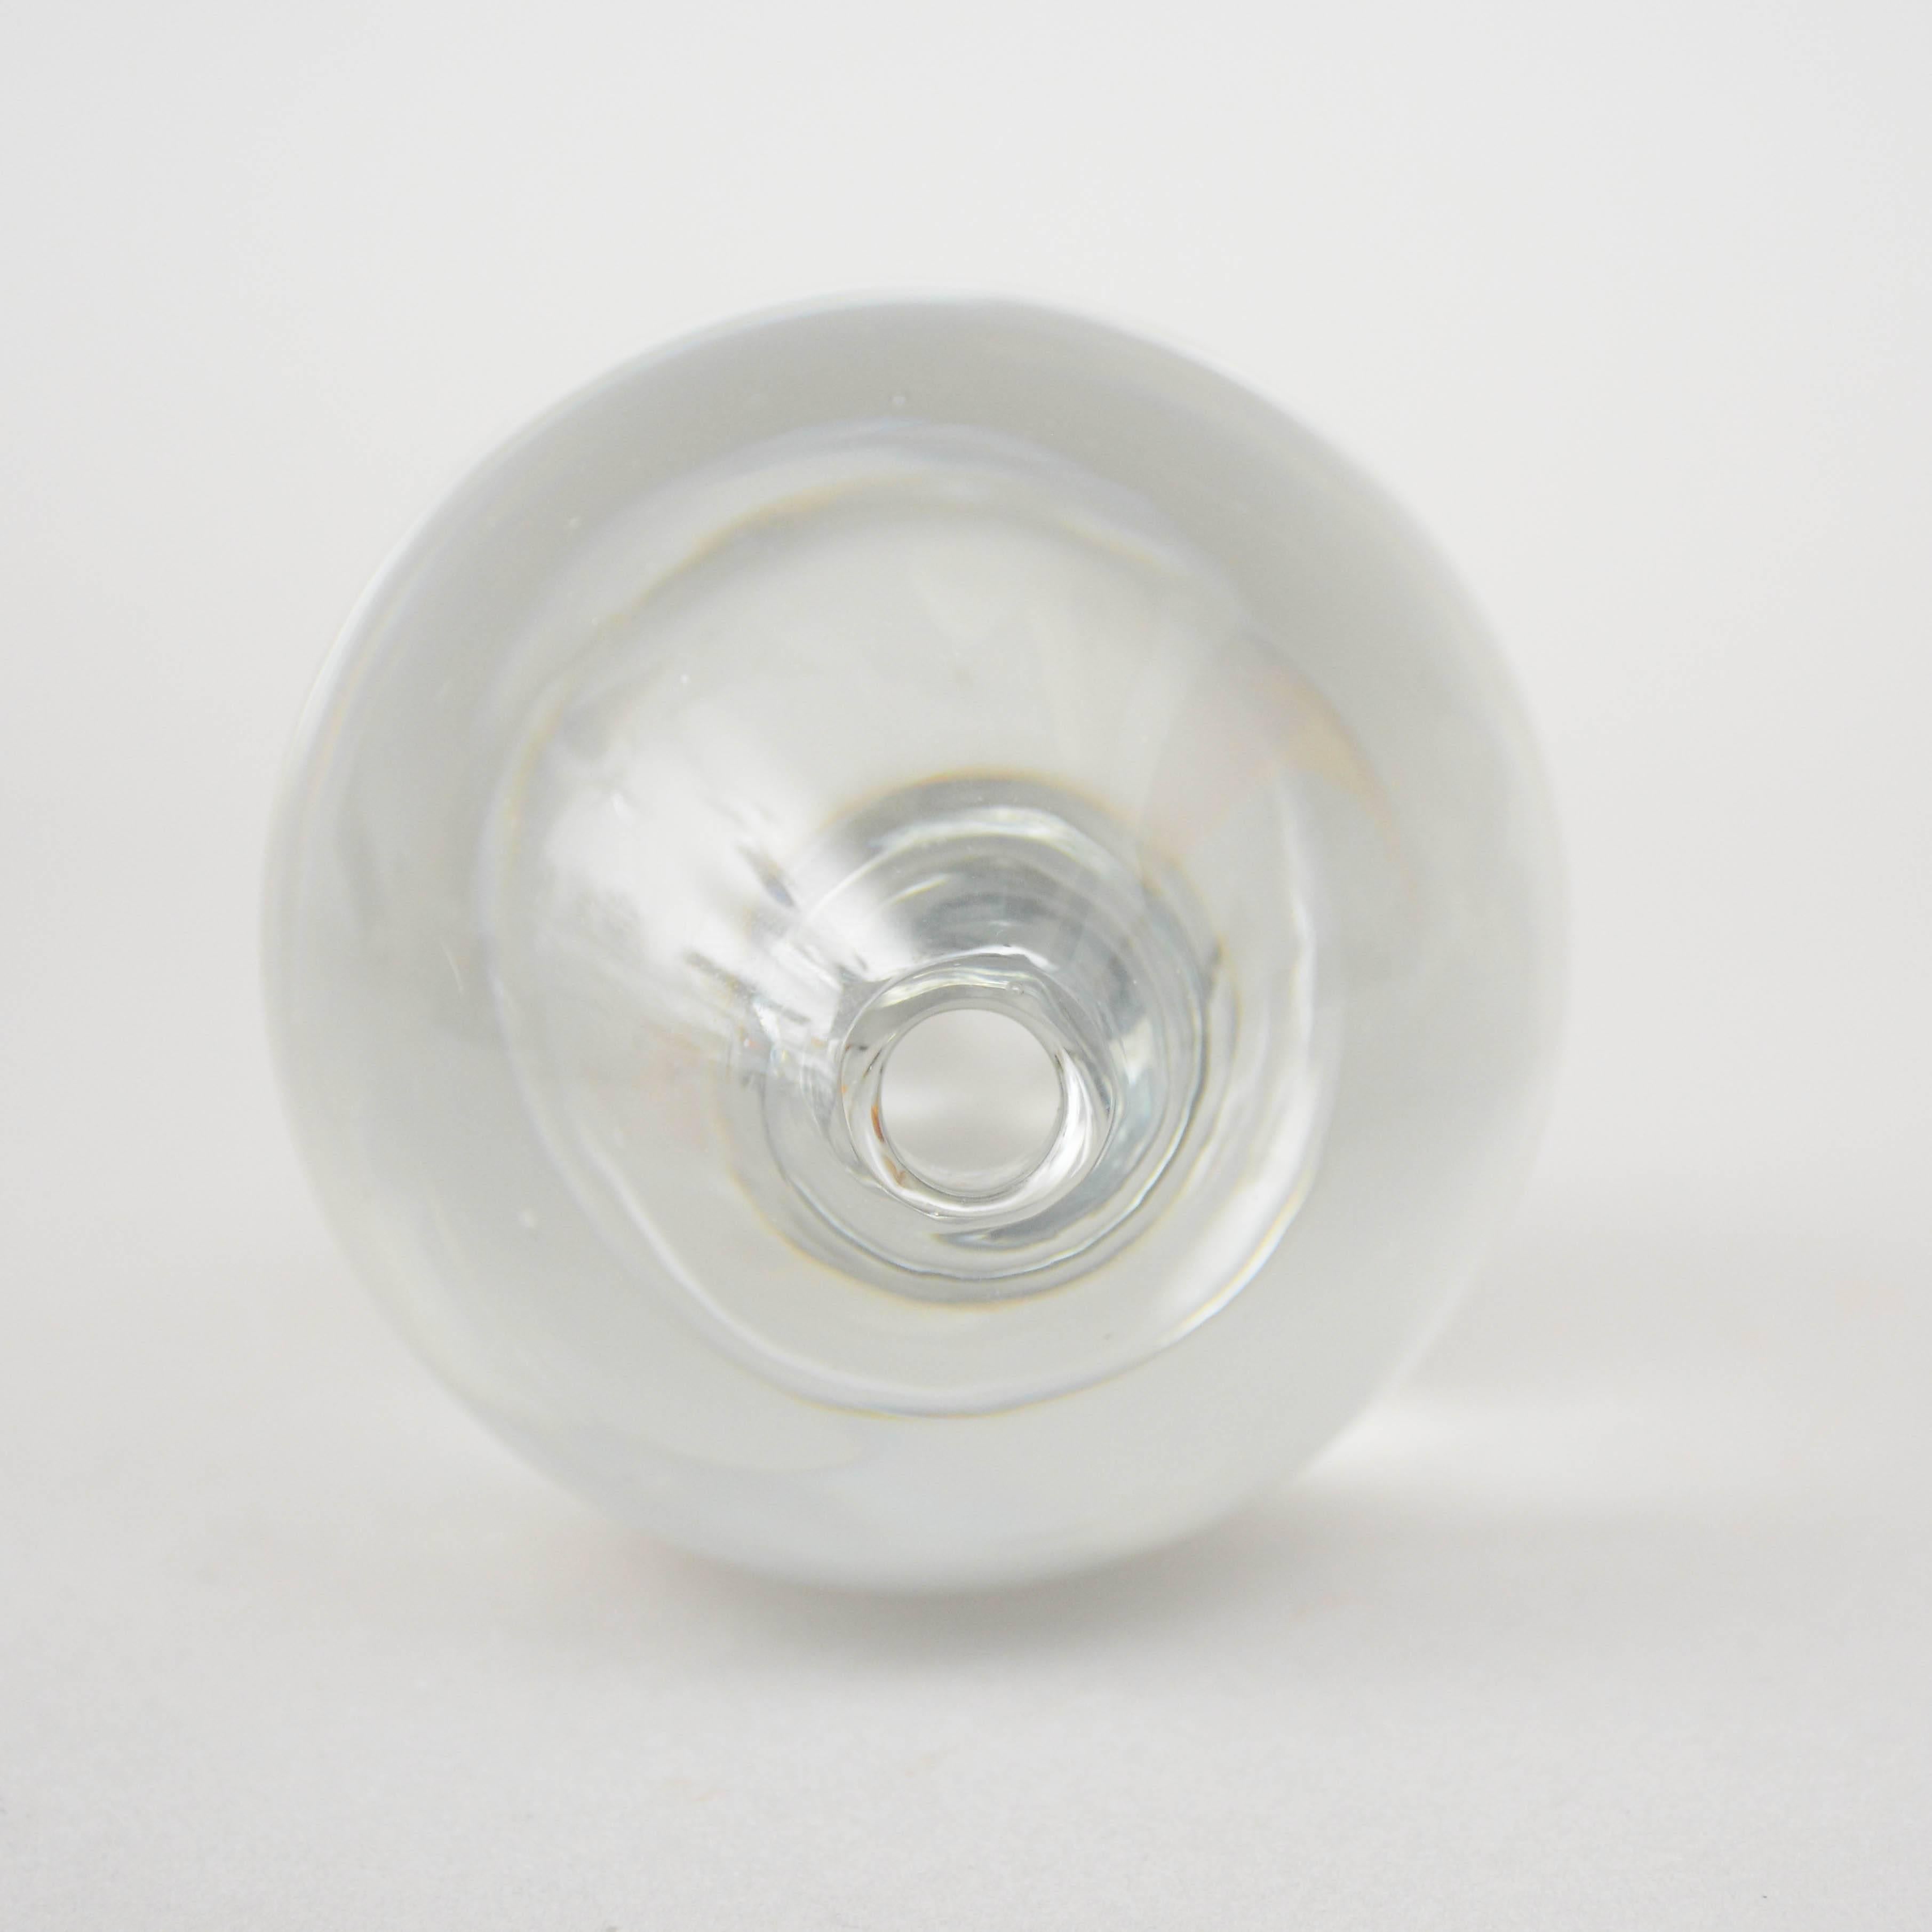 A ovoid shaped vase of clear crystal by Tapio Wirkkala for Iittala, Finland. Signed and dated 1955.